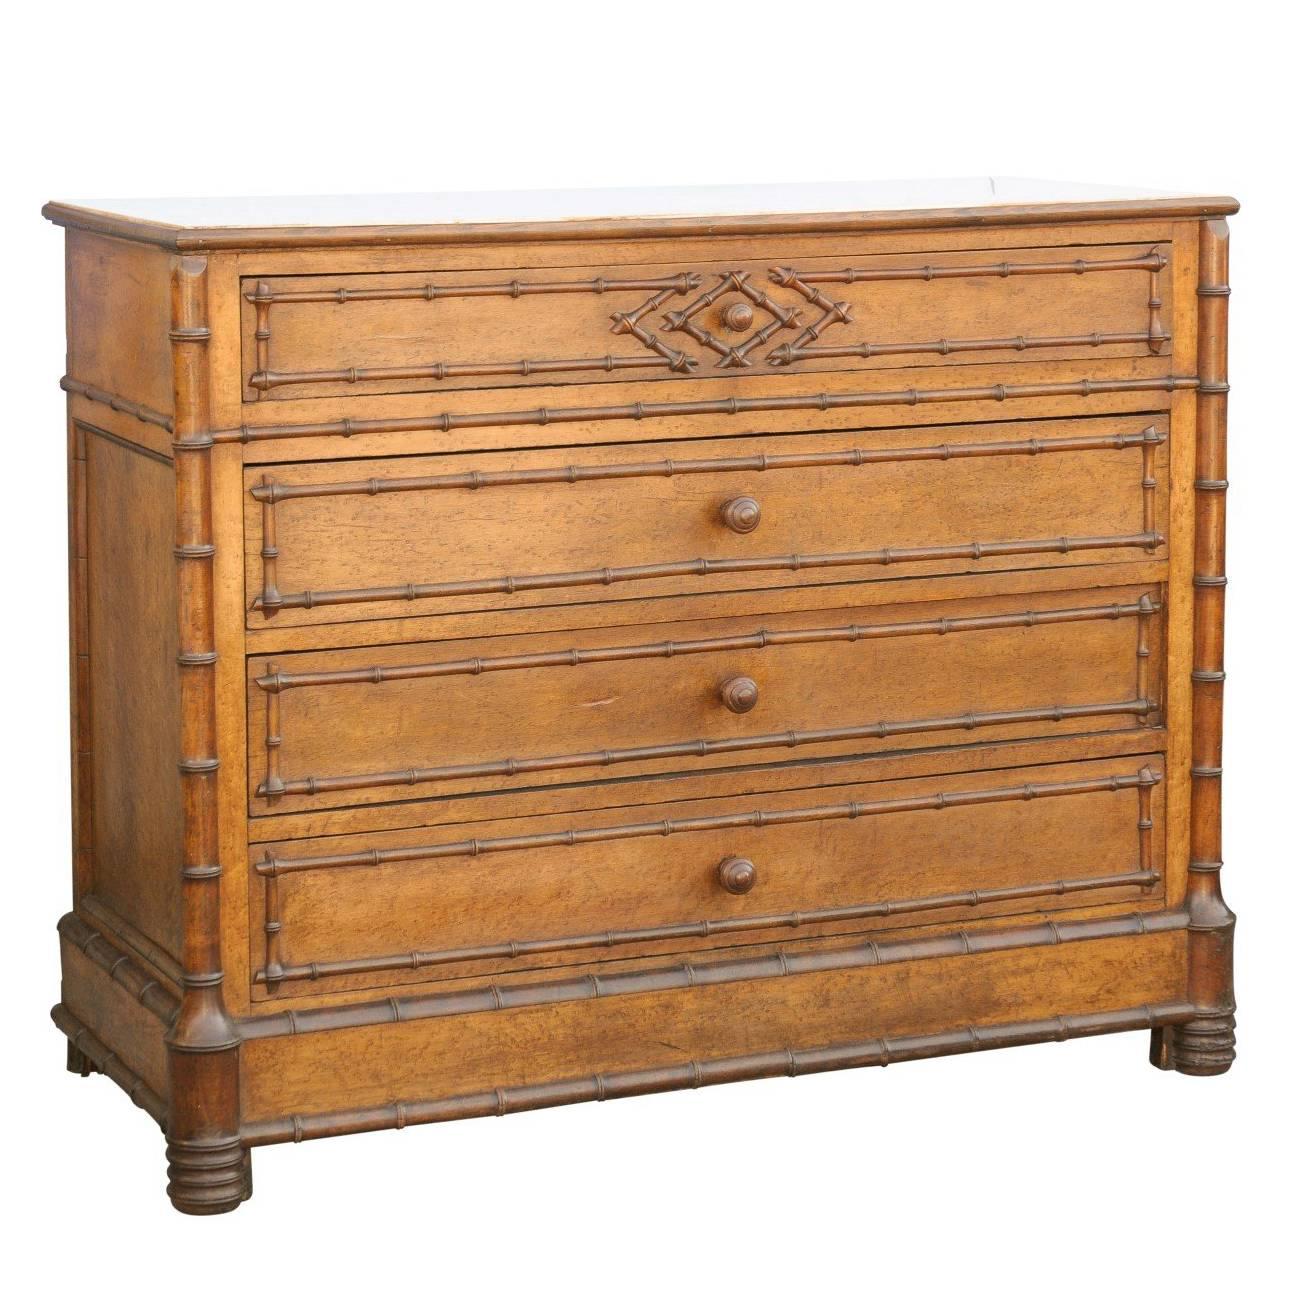 English Faux Bamboo Trimmed Marble-Top Chest of Drawers with Diamond Motif 